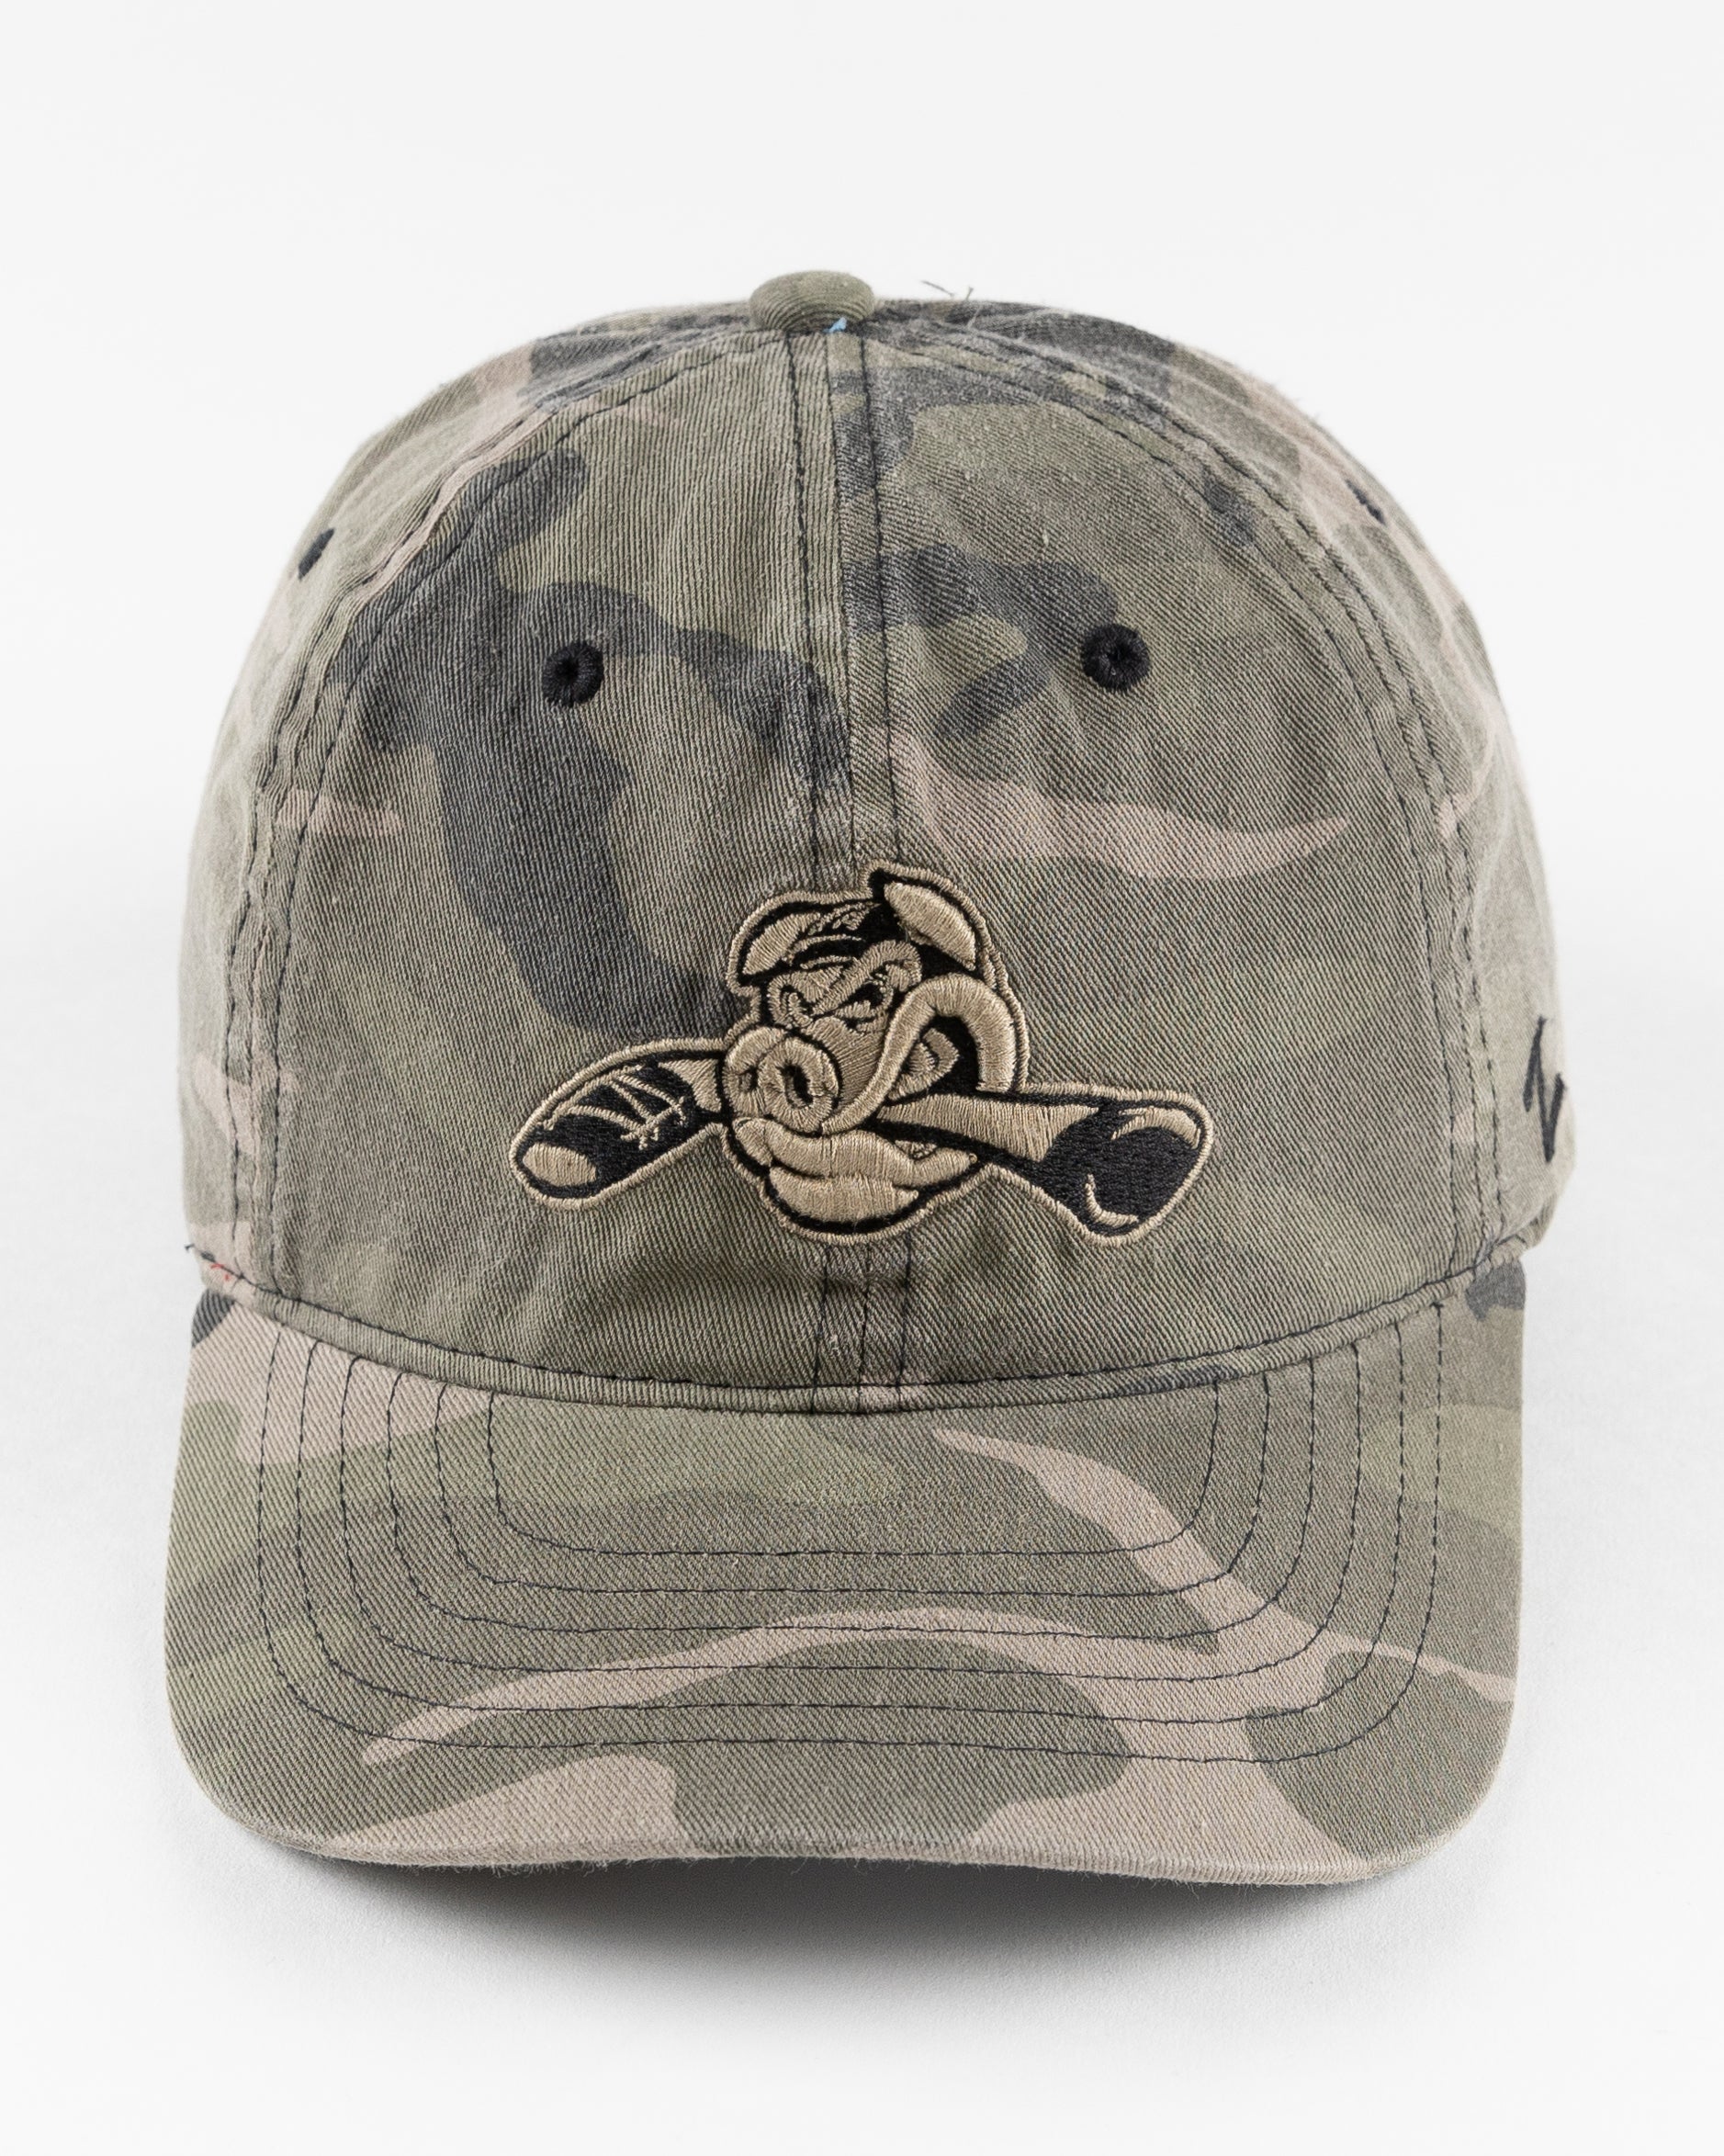 Rockford IceHogs Zephyr Washed Camo Hat